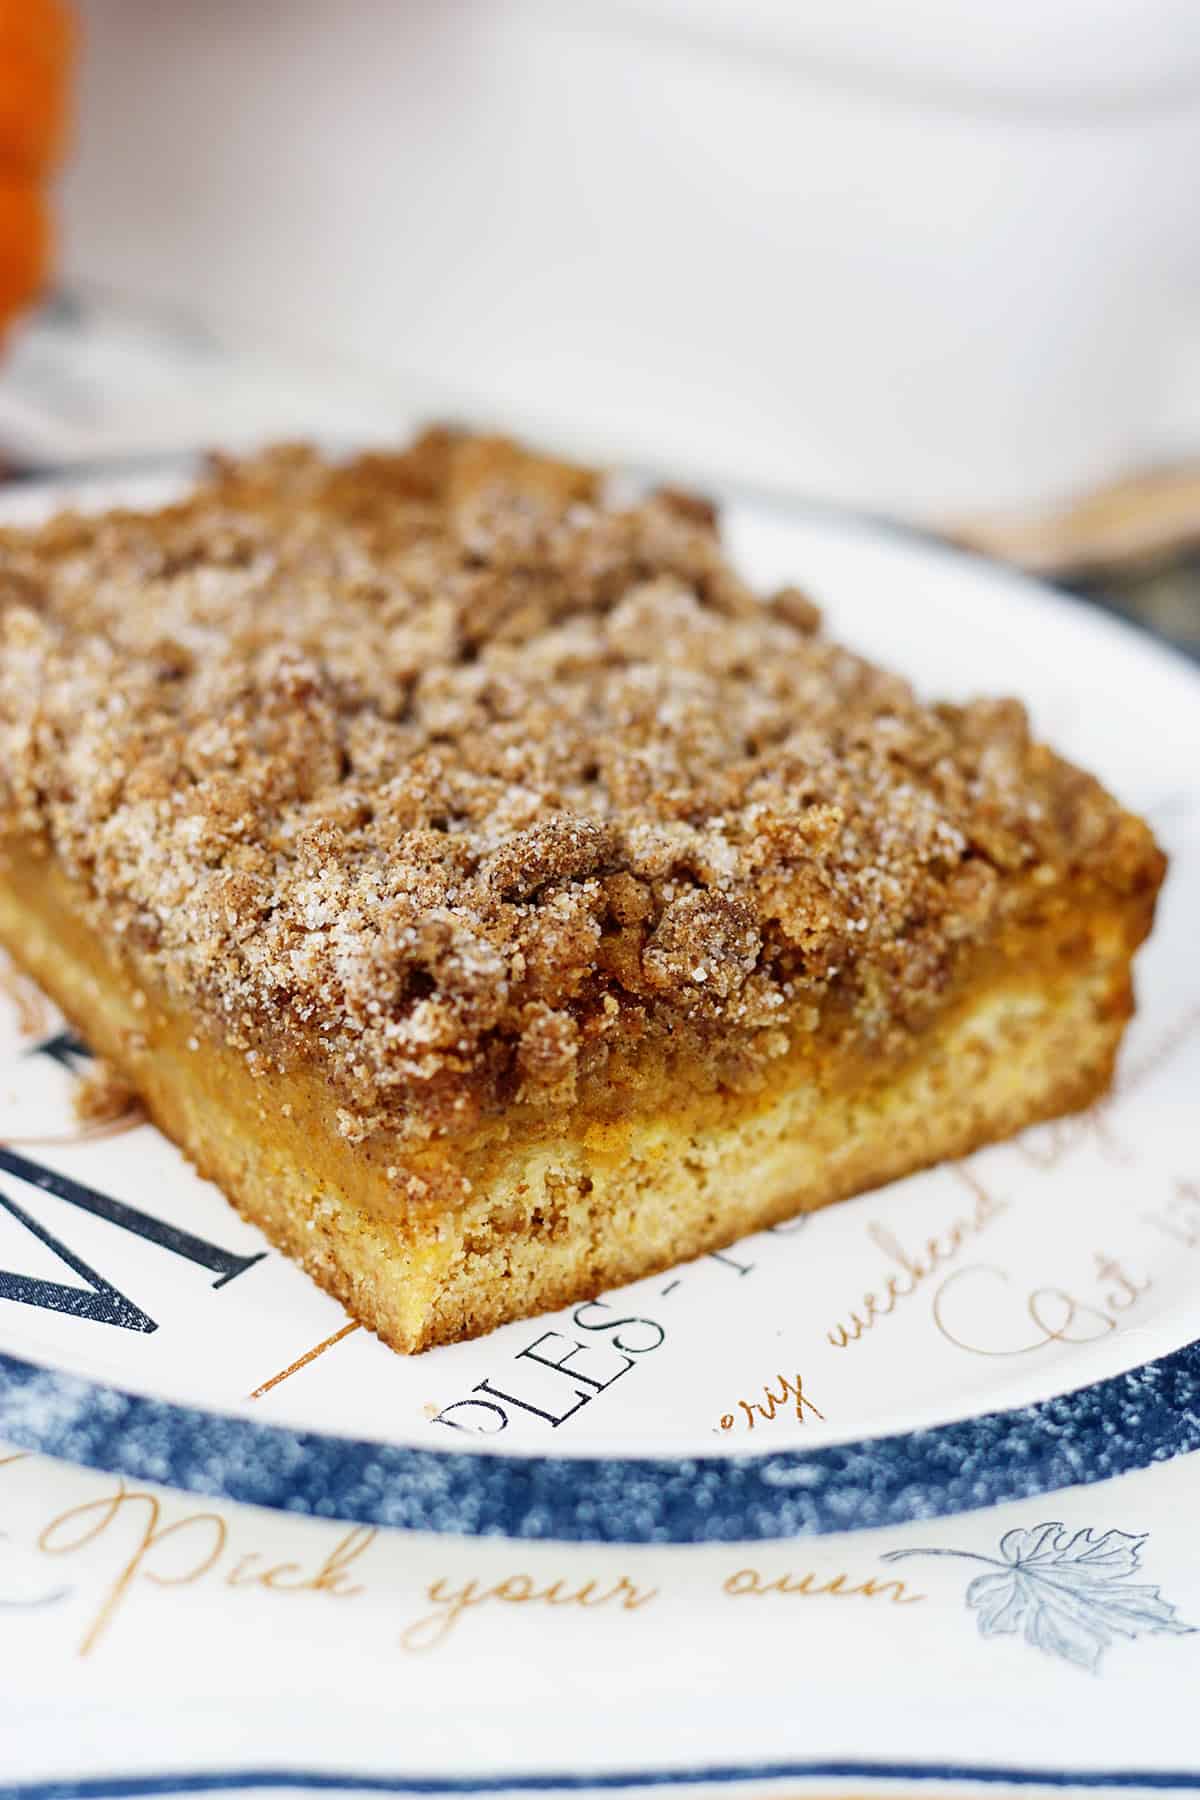 A slice of pumpkin crumb cake on a paper plate.